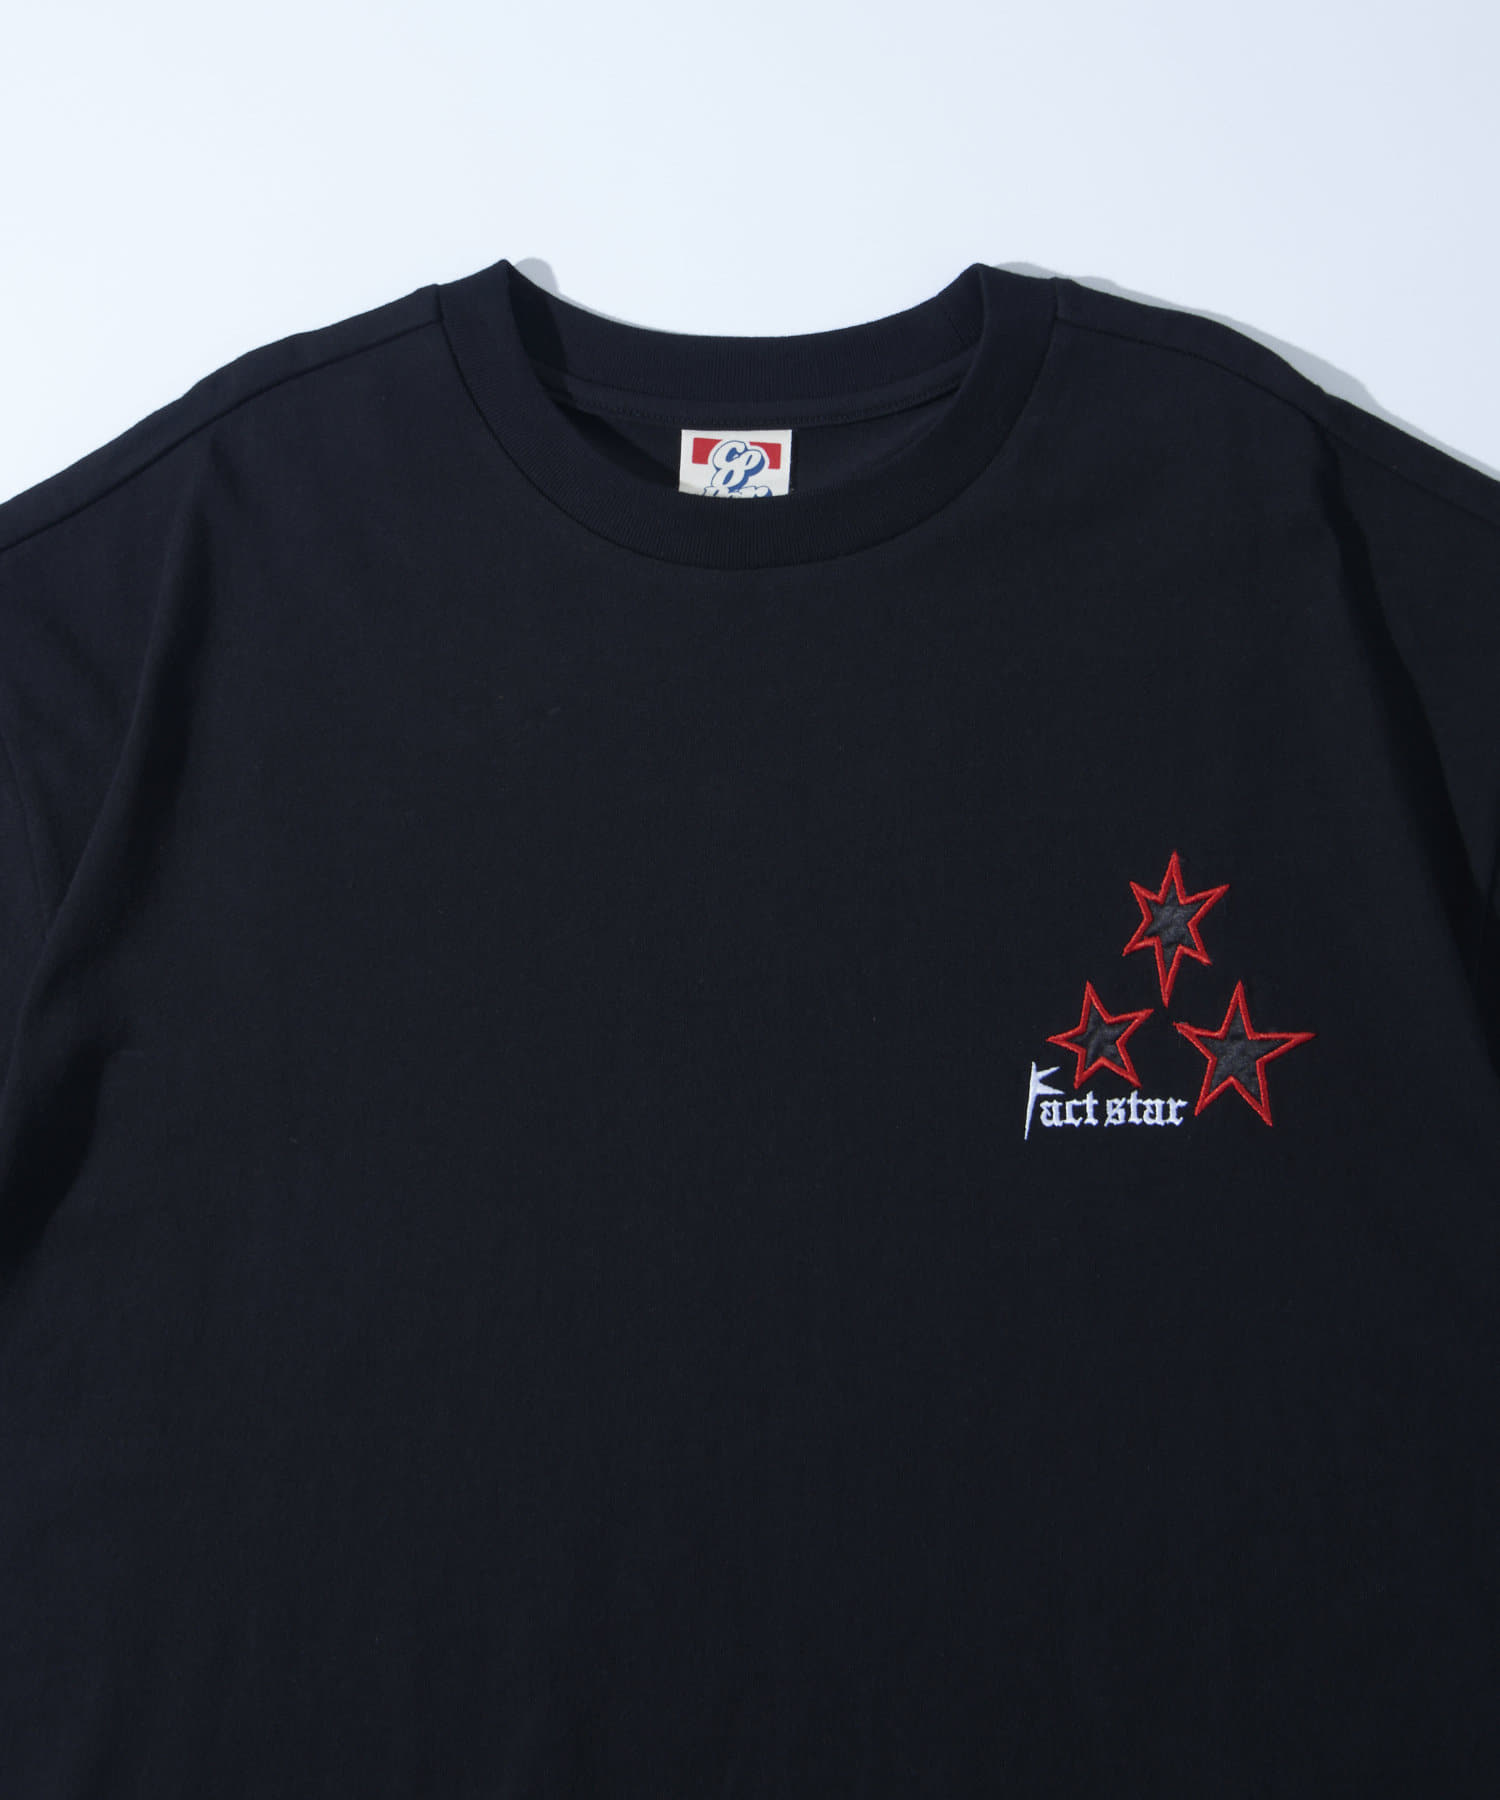 WHO’S WHO gallery(フーズフーギャラリー) COOPER FACT STAR TEE